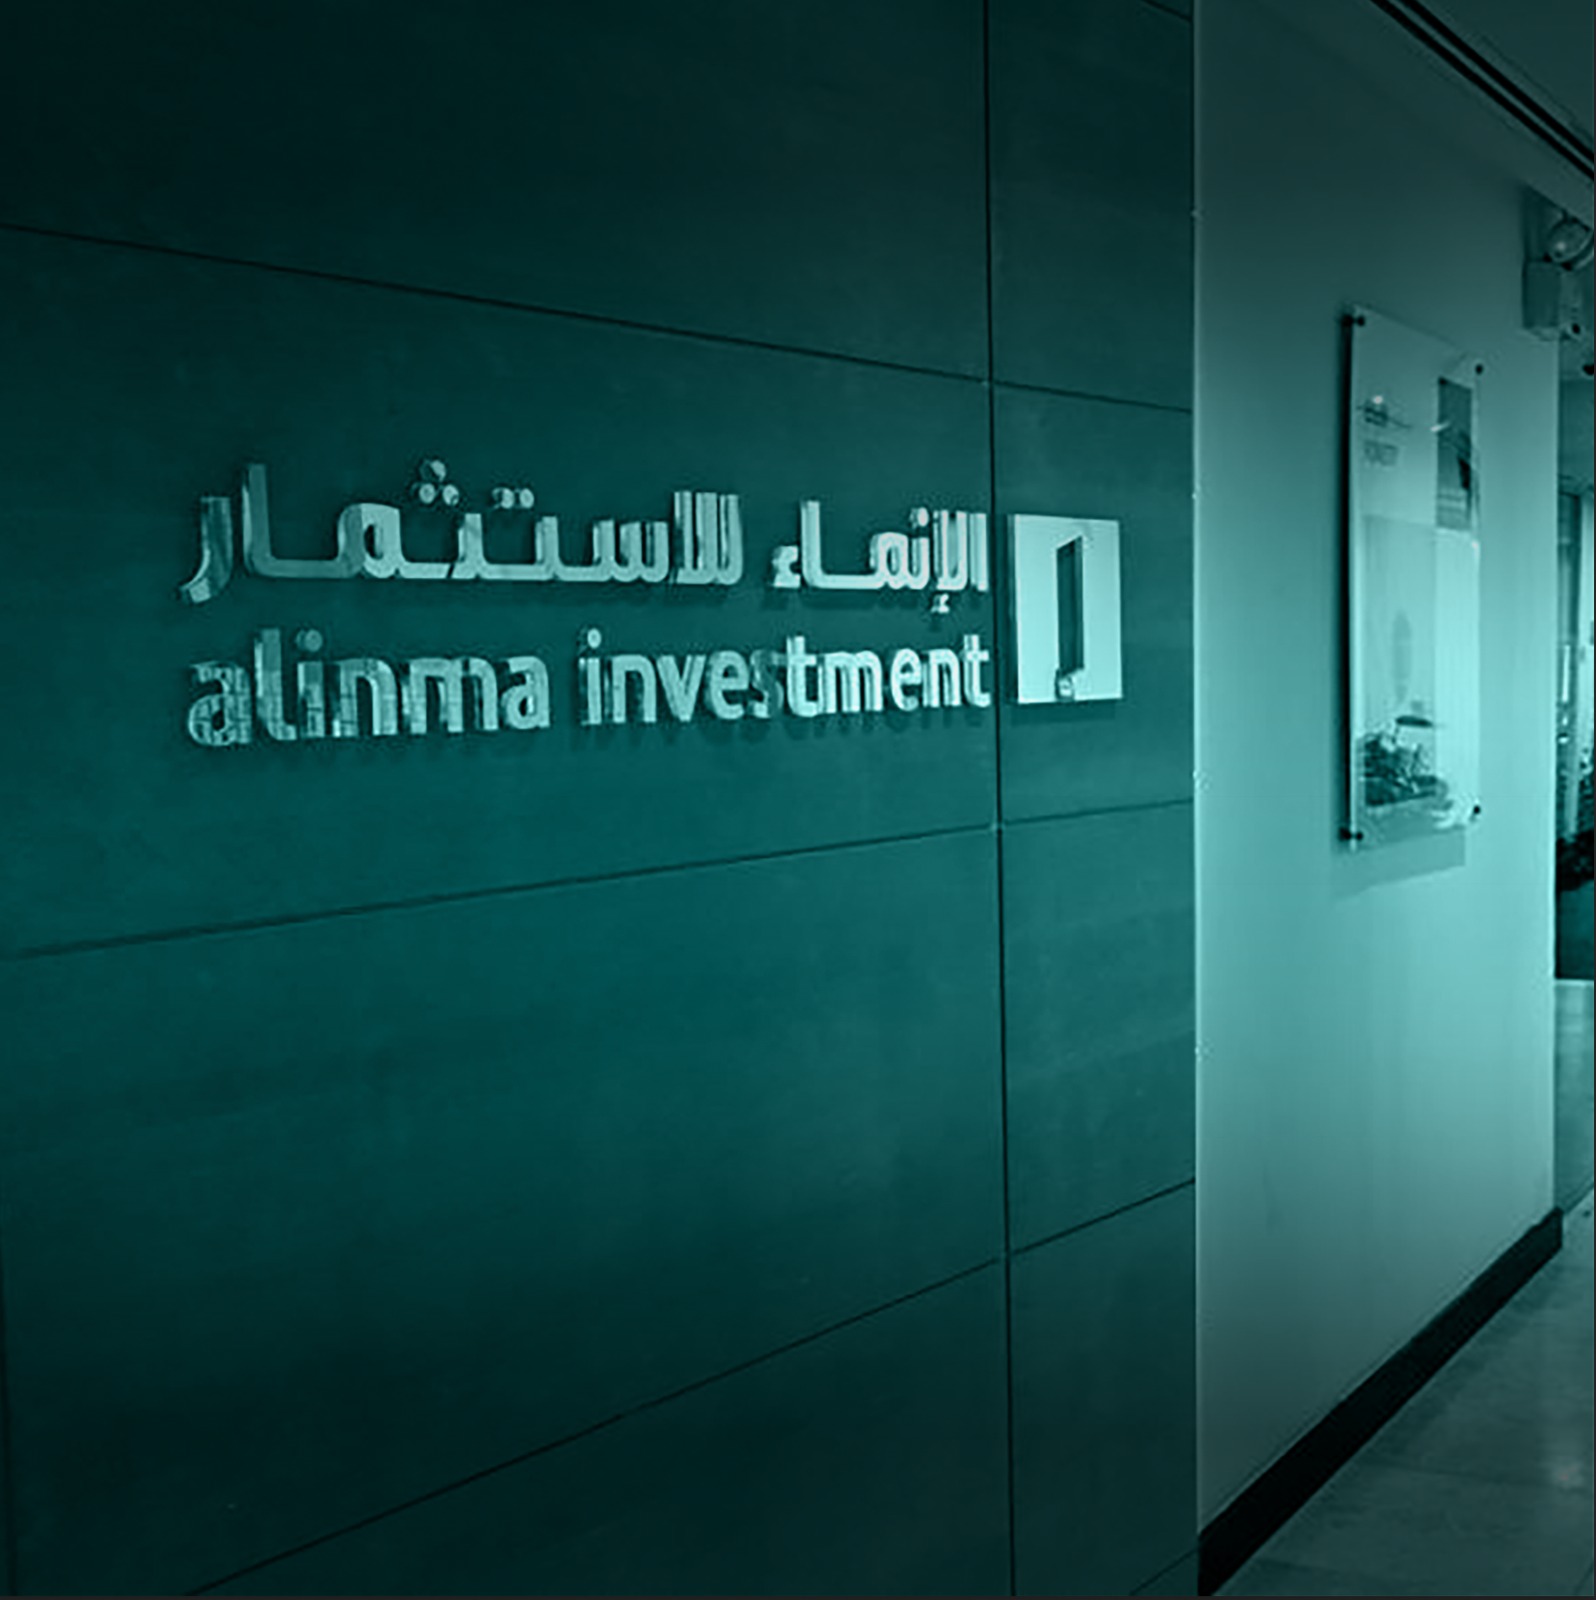 Announcement by Alinma Investment Company regarding a change of the membership of the board of directors of Alinma Orphan Care Endowment Fund.